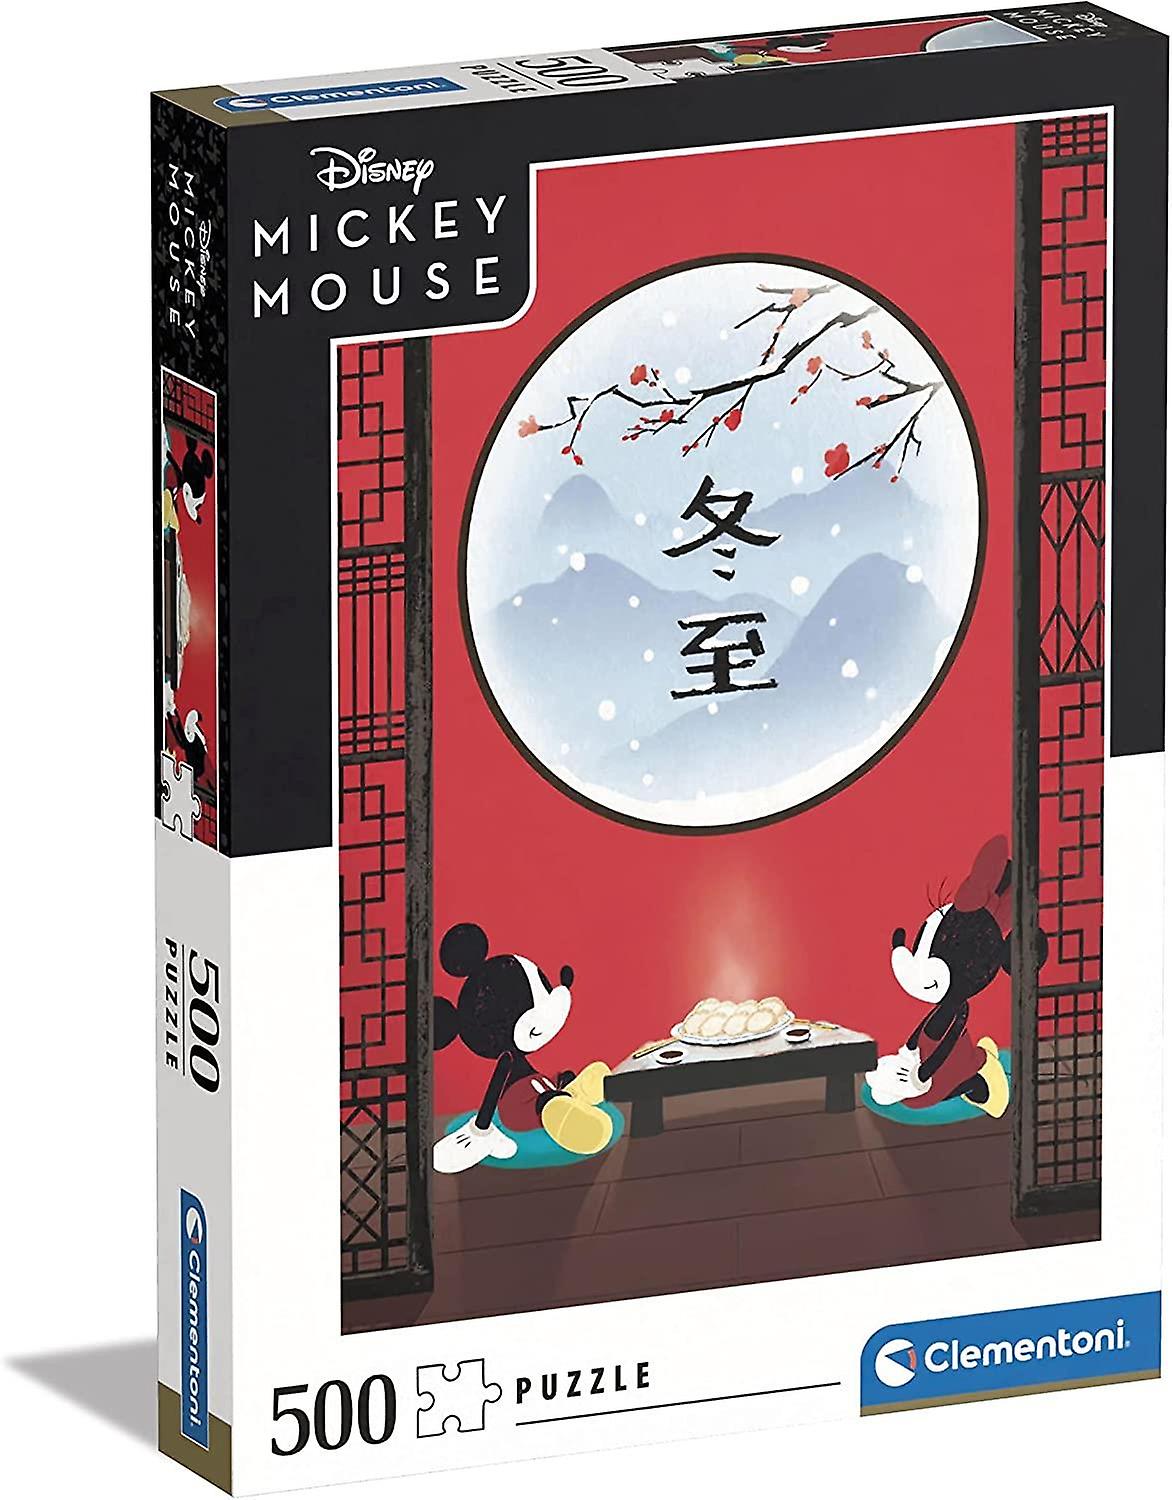 Clementoni Disney Minnie and Mickey Mouse  Jigsaw Puzzle (500 Pieces)